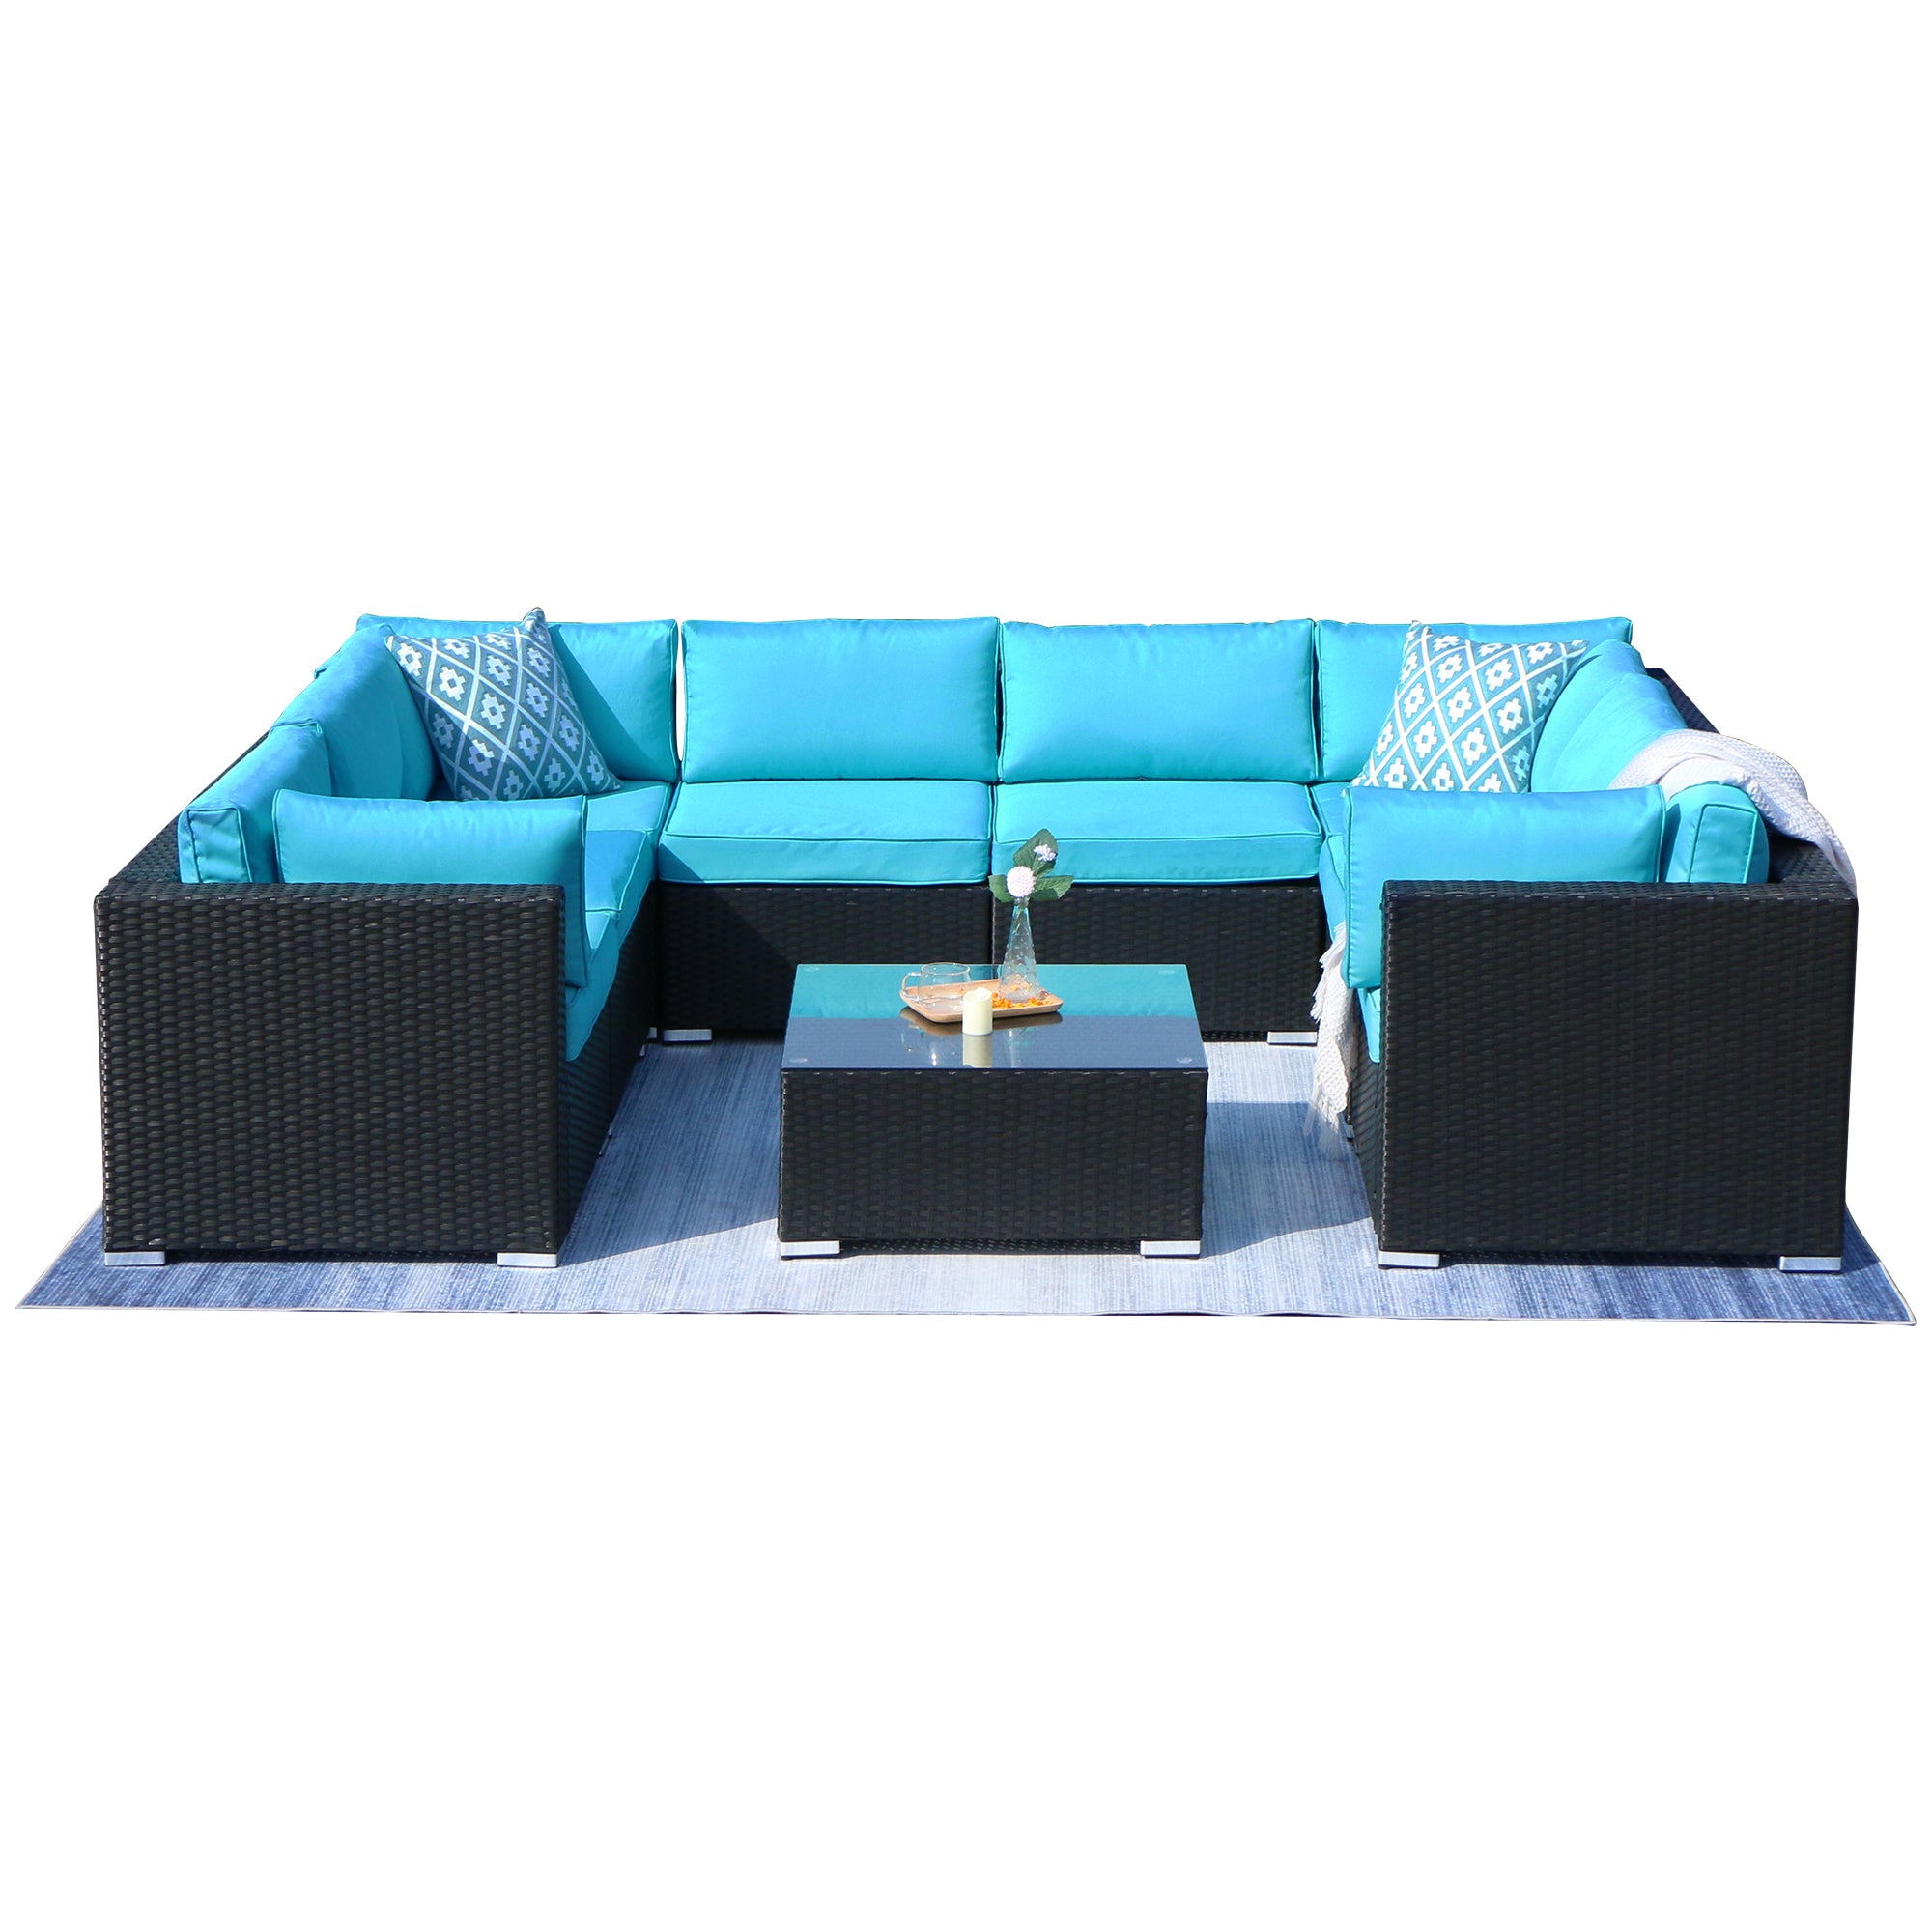 9 Piece Outdoor Conversation Rattan Sofa, with Coffee Table, Turquoise Cushions